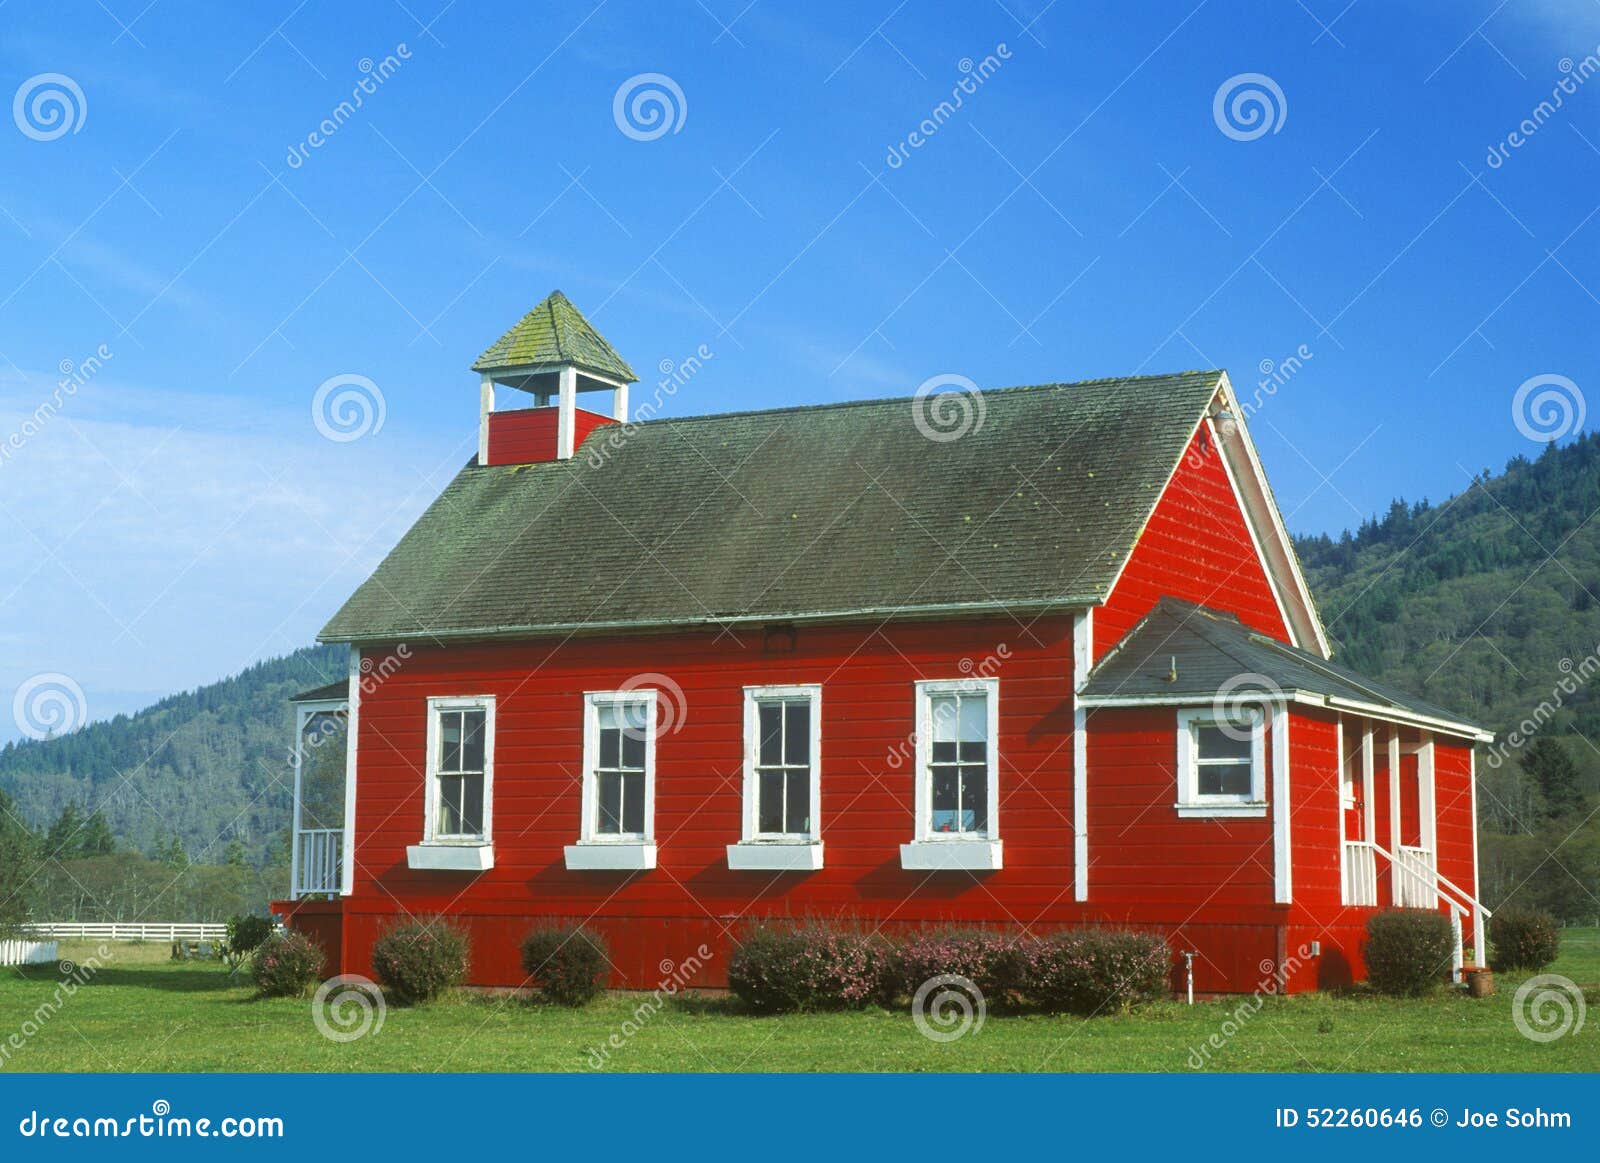 red, one-room schoolhouse, stone lagoon on pch, northern ca